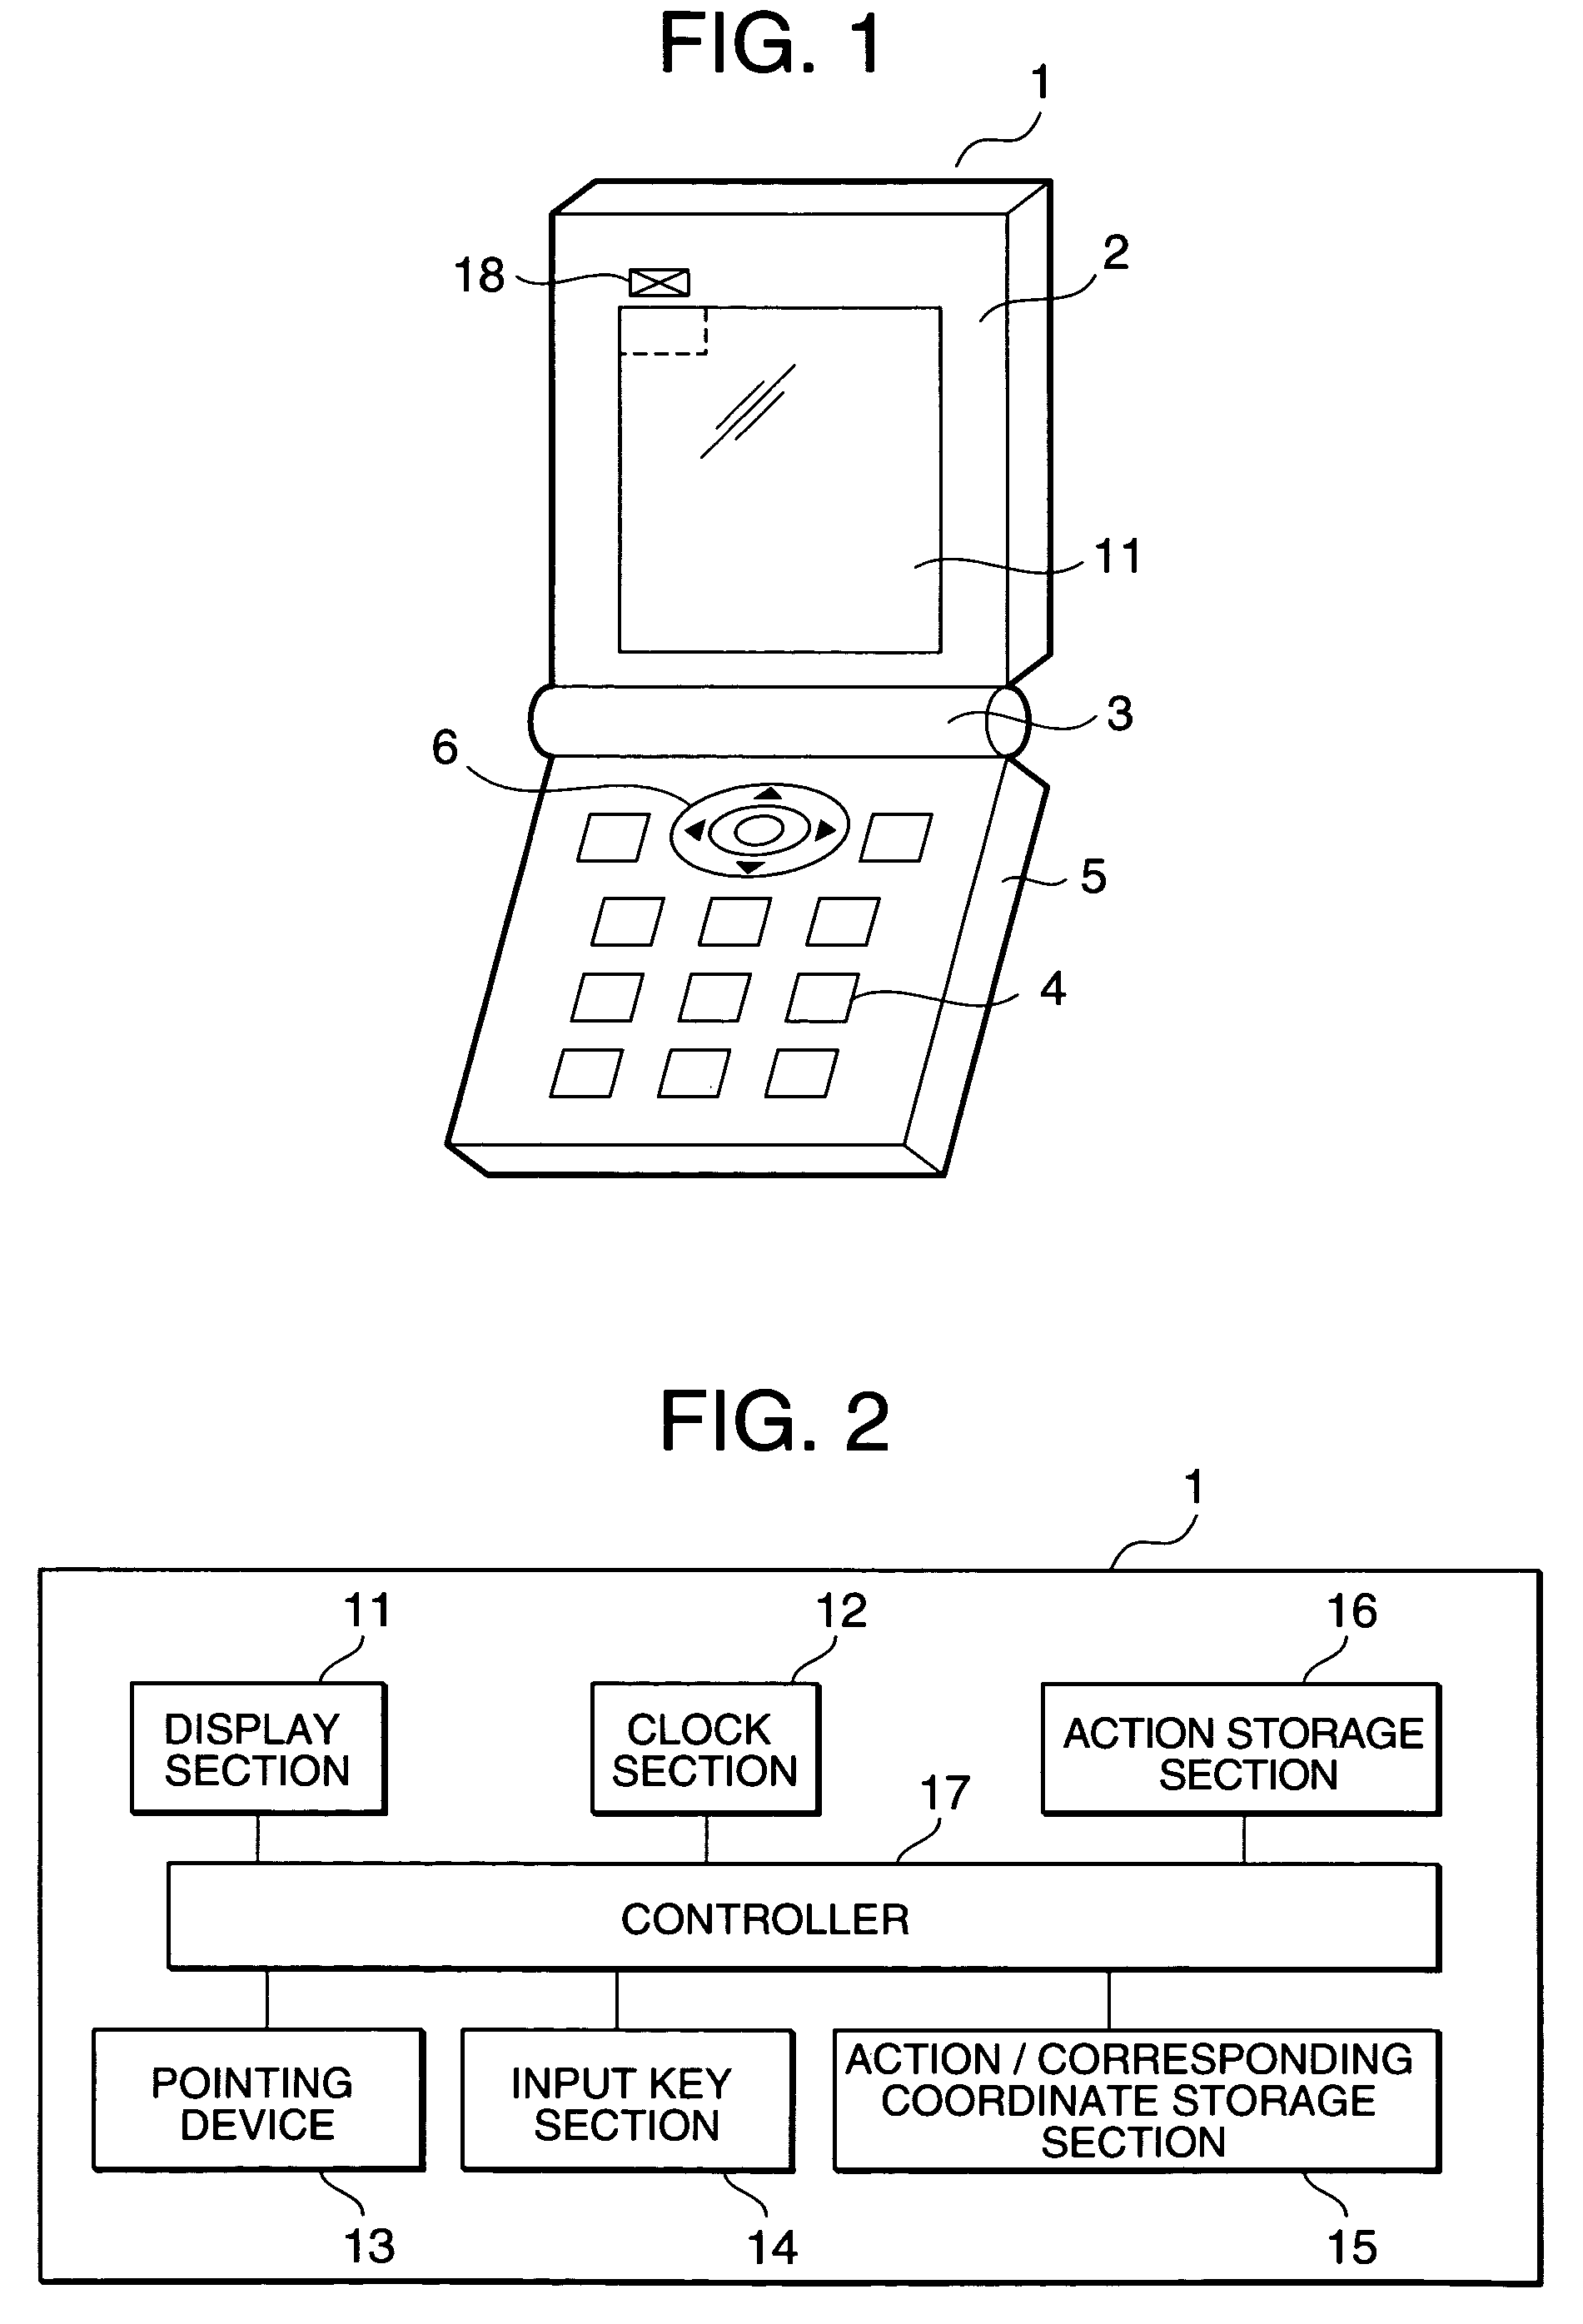 Portable terminal device with pointing device